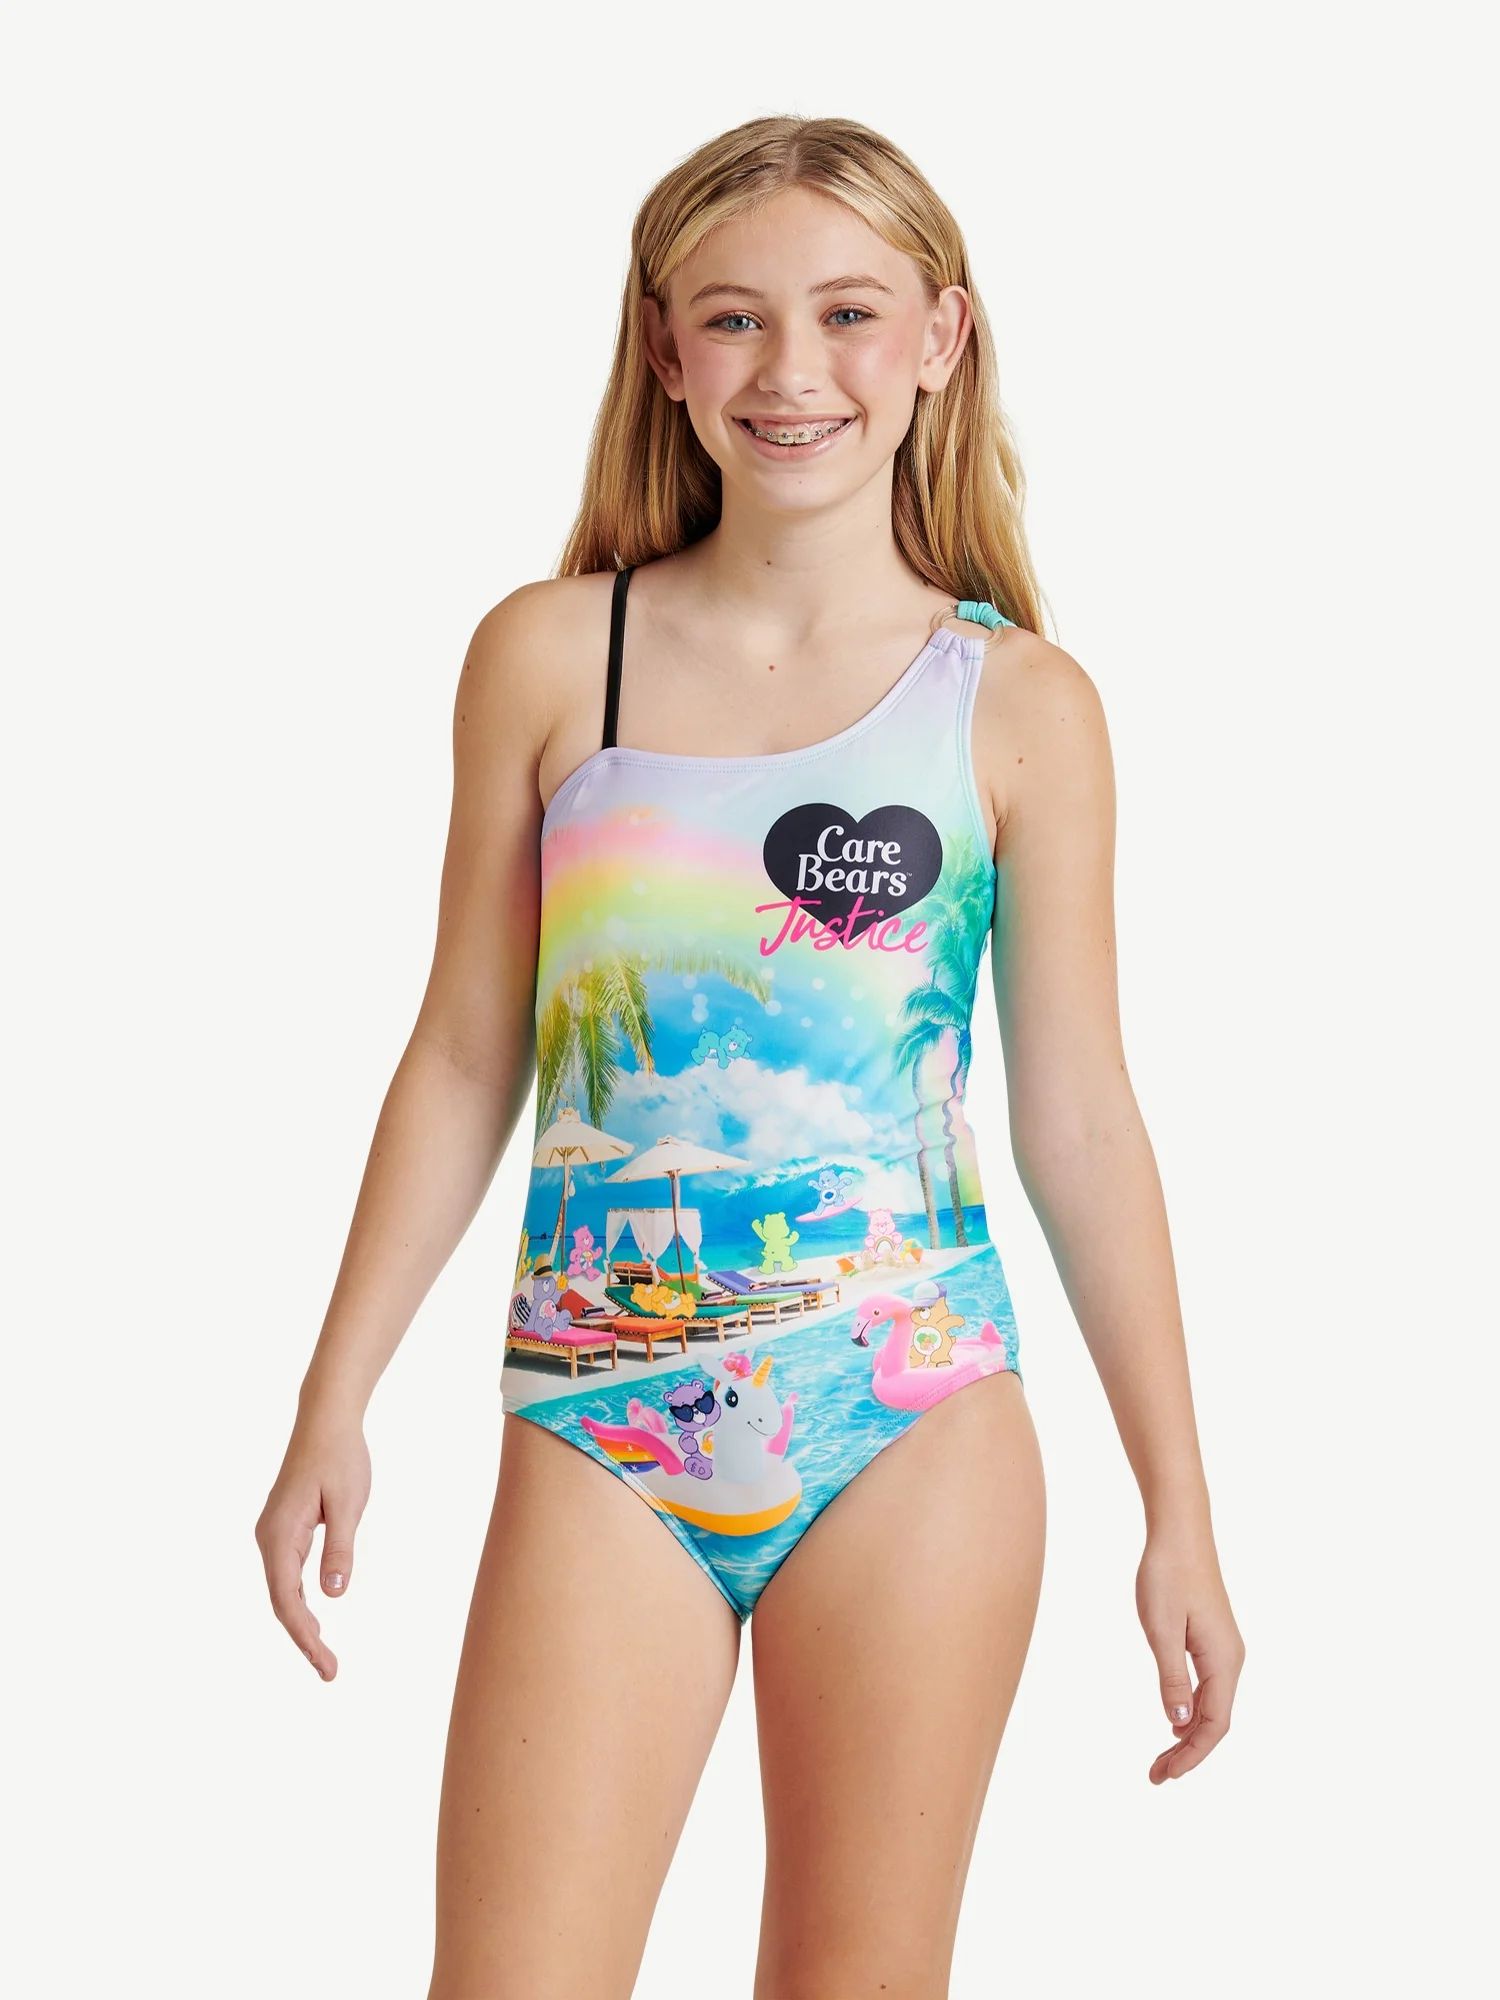 Justice Care Bears One Piece Beach Swimsuit, Sizes 5-18 | Walmart (US)